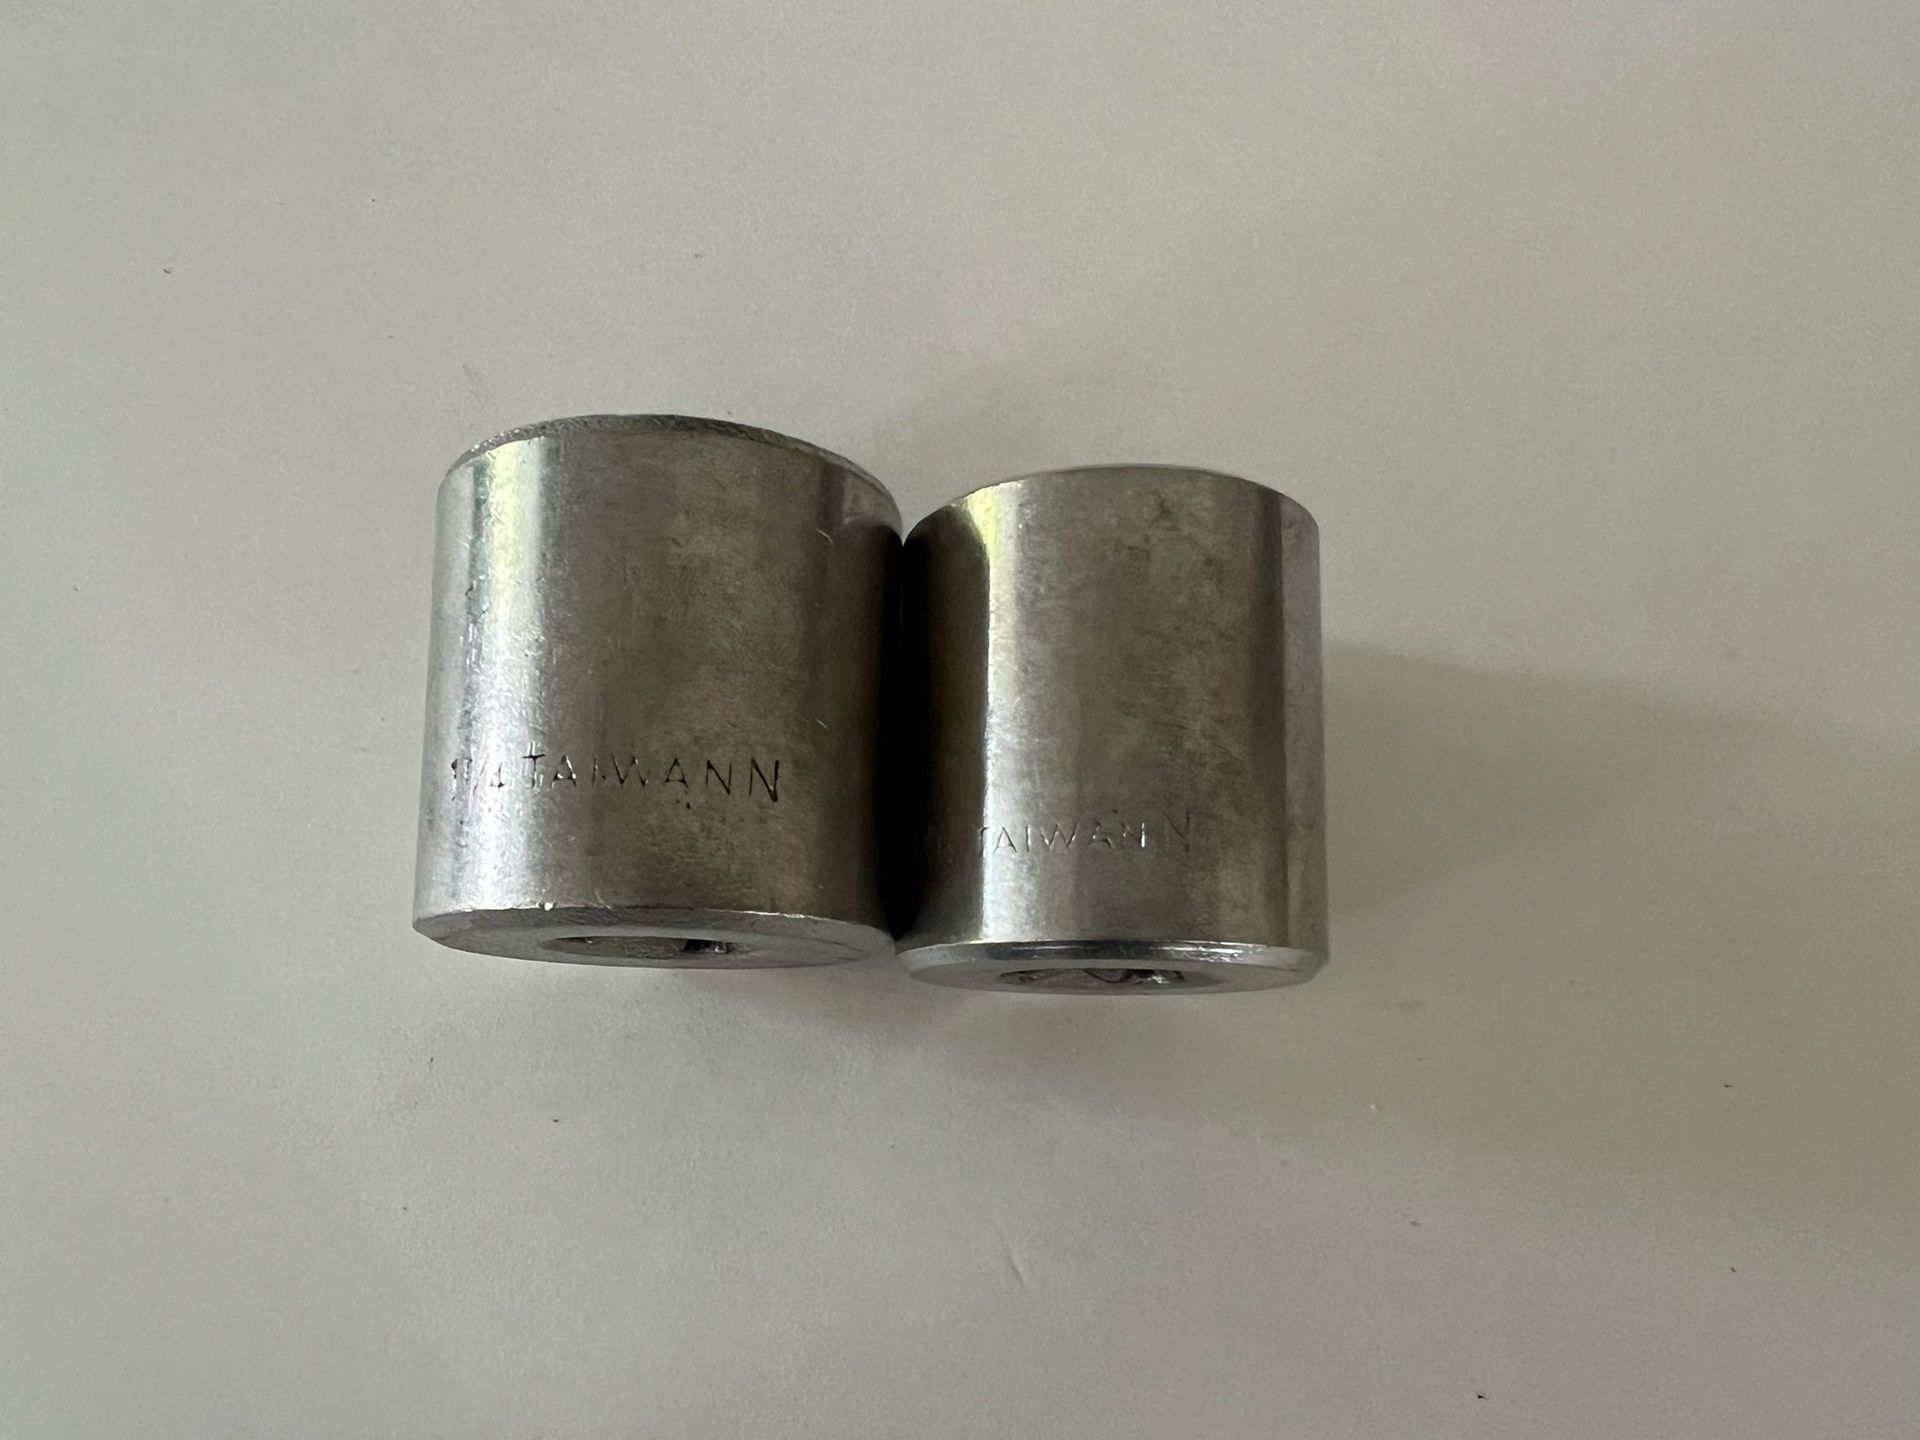 Lot of 2 Unbranded Socket,12 Point, 1/2" Square Drive Socket (11/4 & 1/18)Taiwan